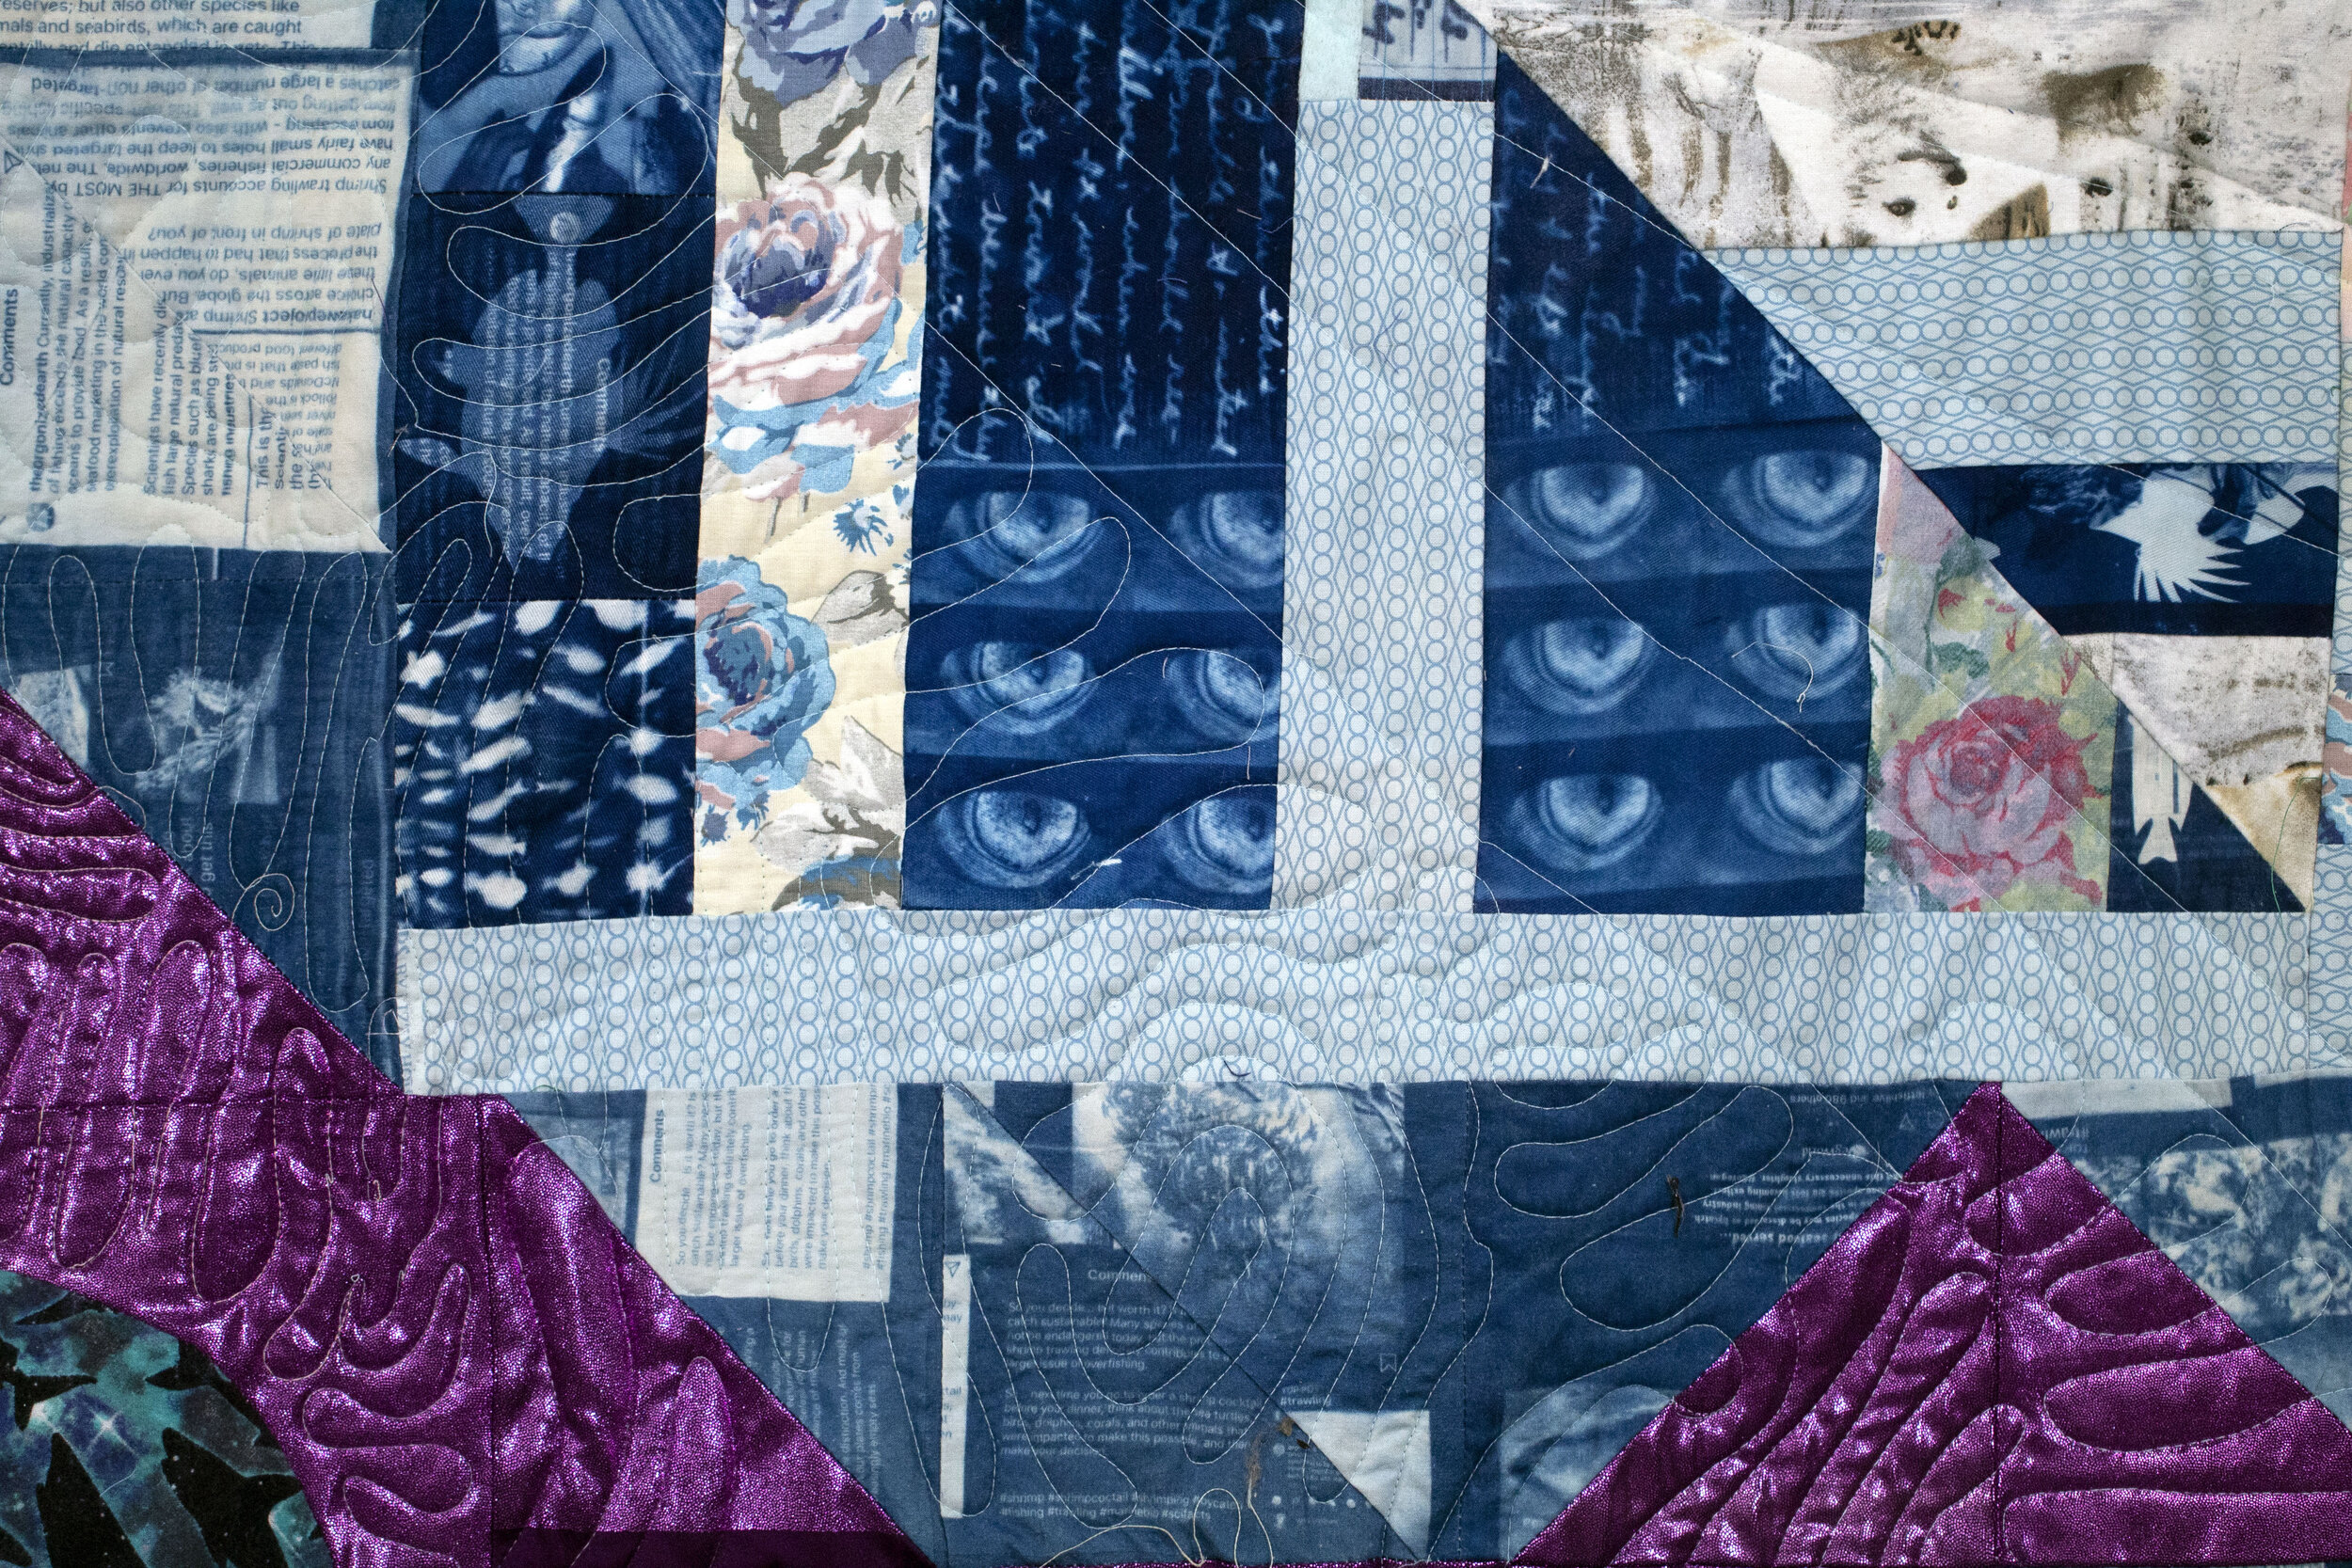 The Crossing Quilt (detail)